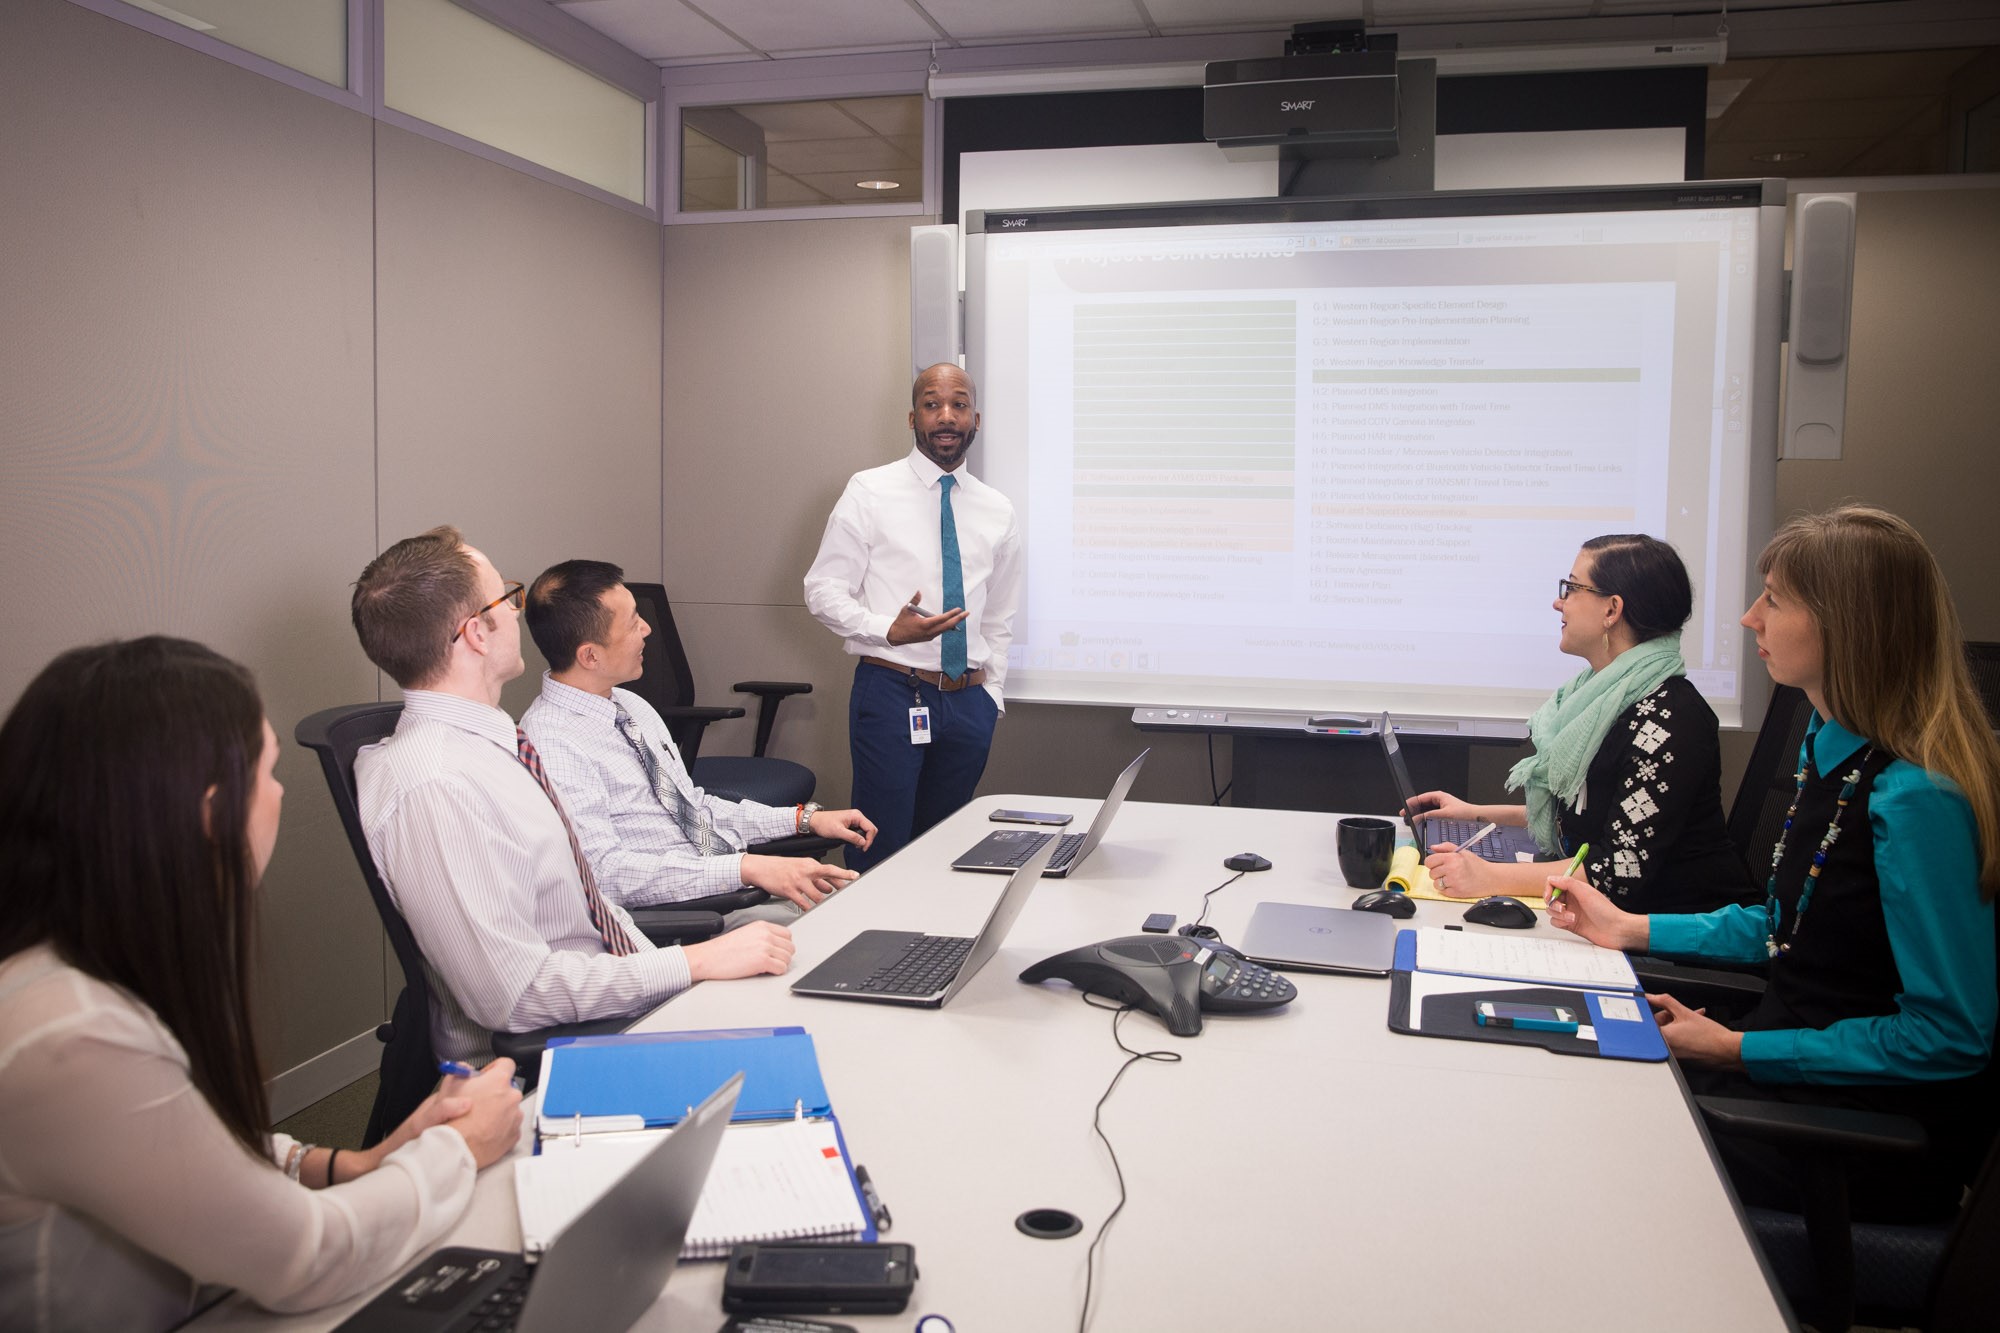 Employees in a conference room are listening to a presentation and are viewing information displayed on a Smart board